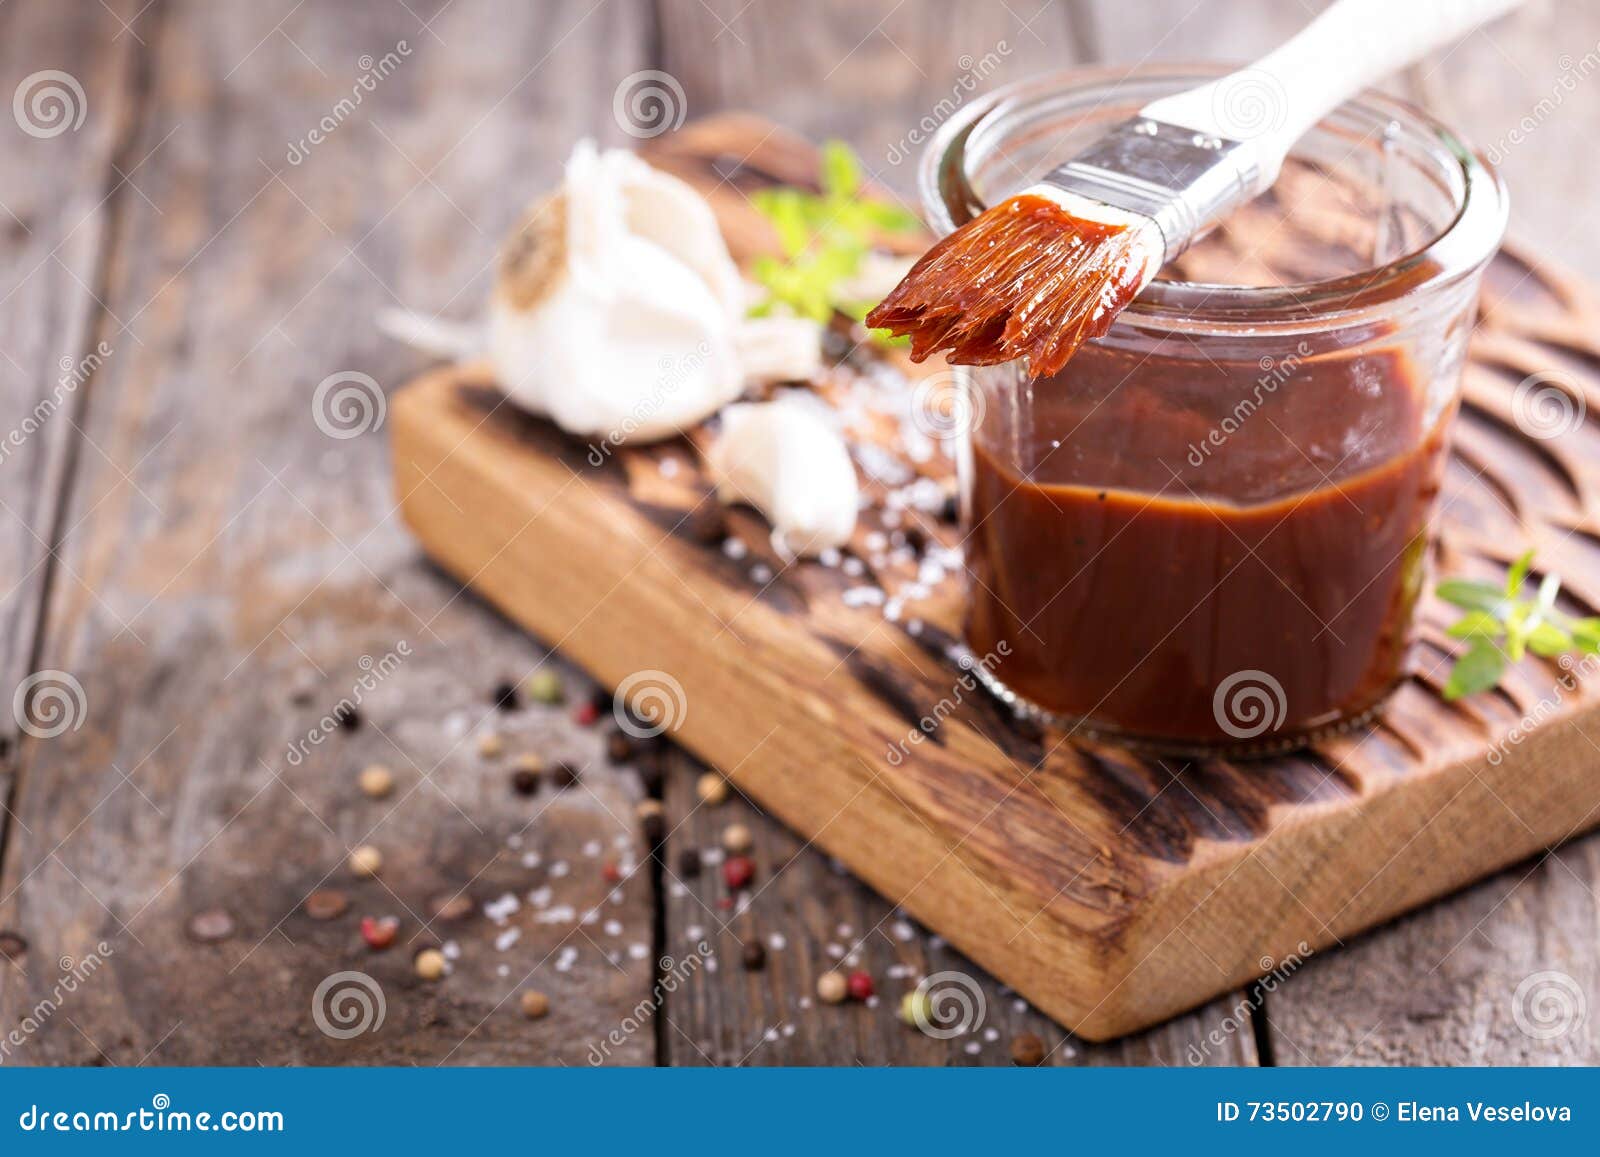 barbeque sauce in a jar